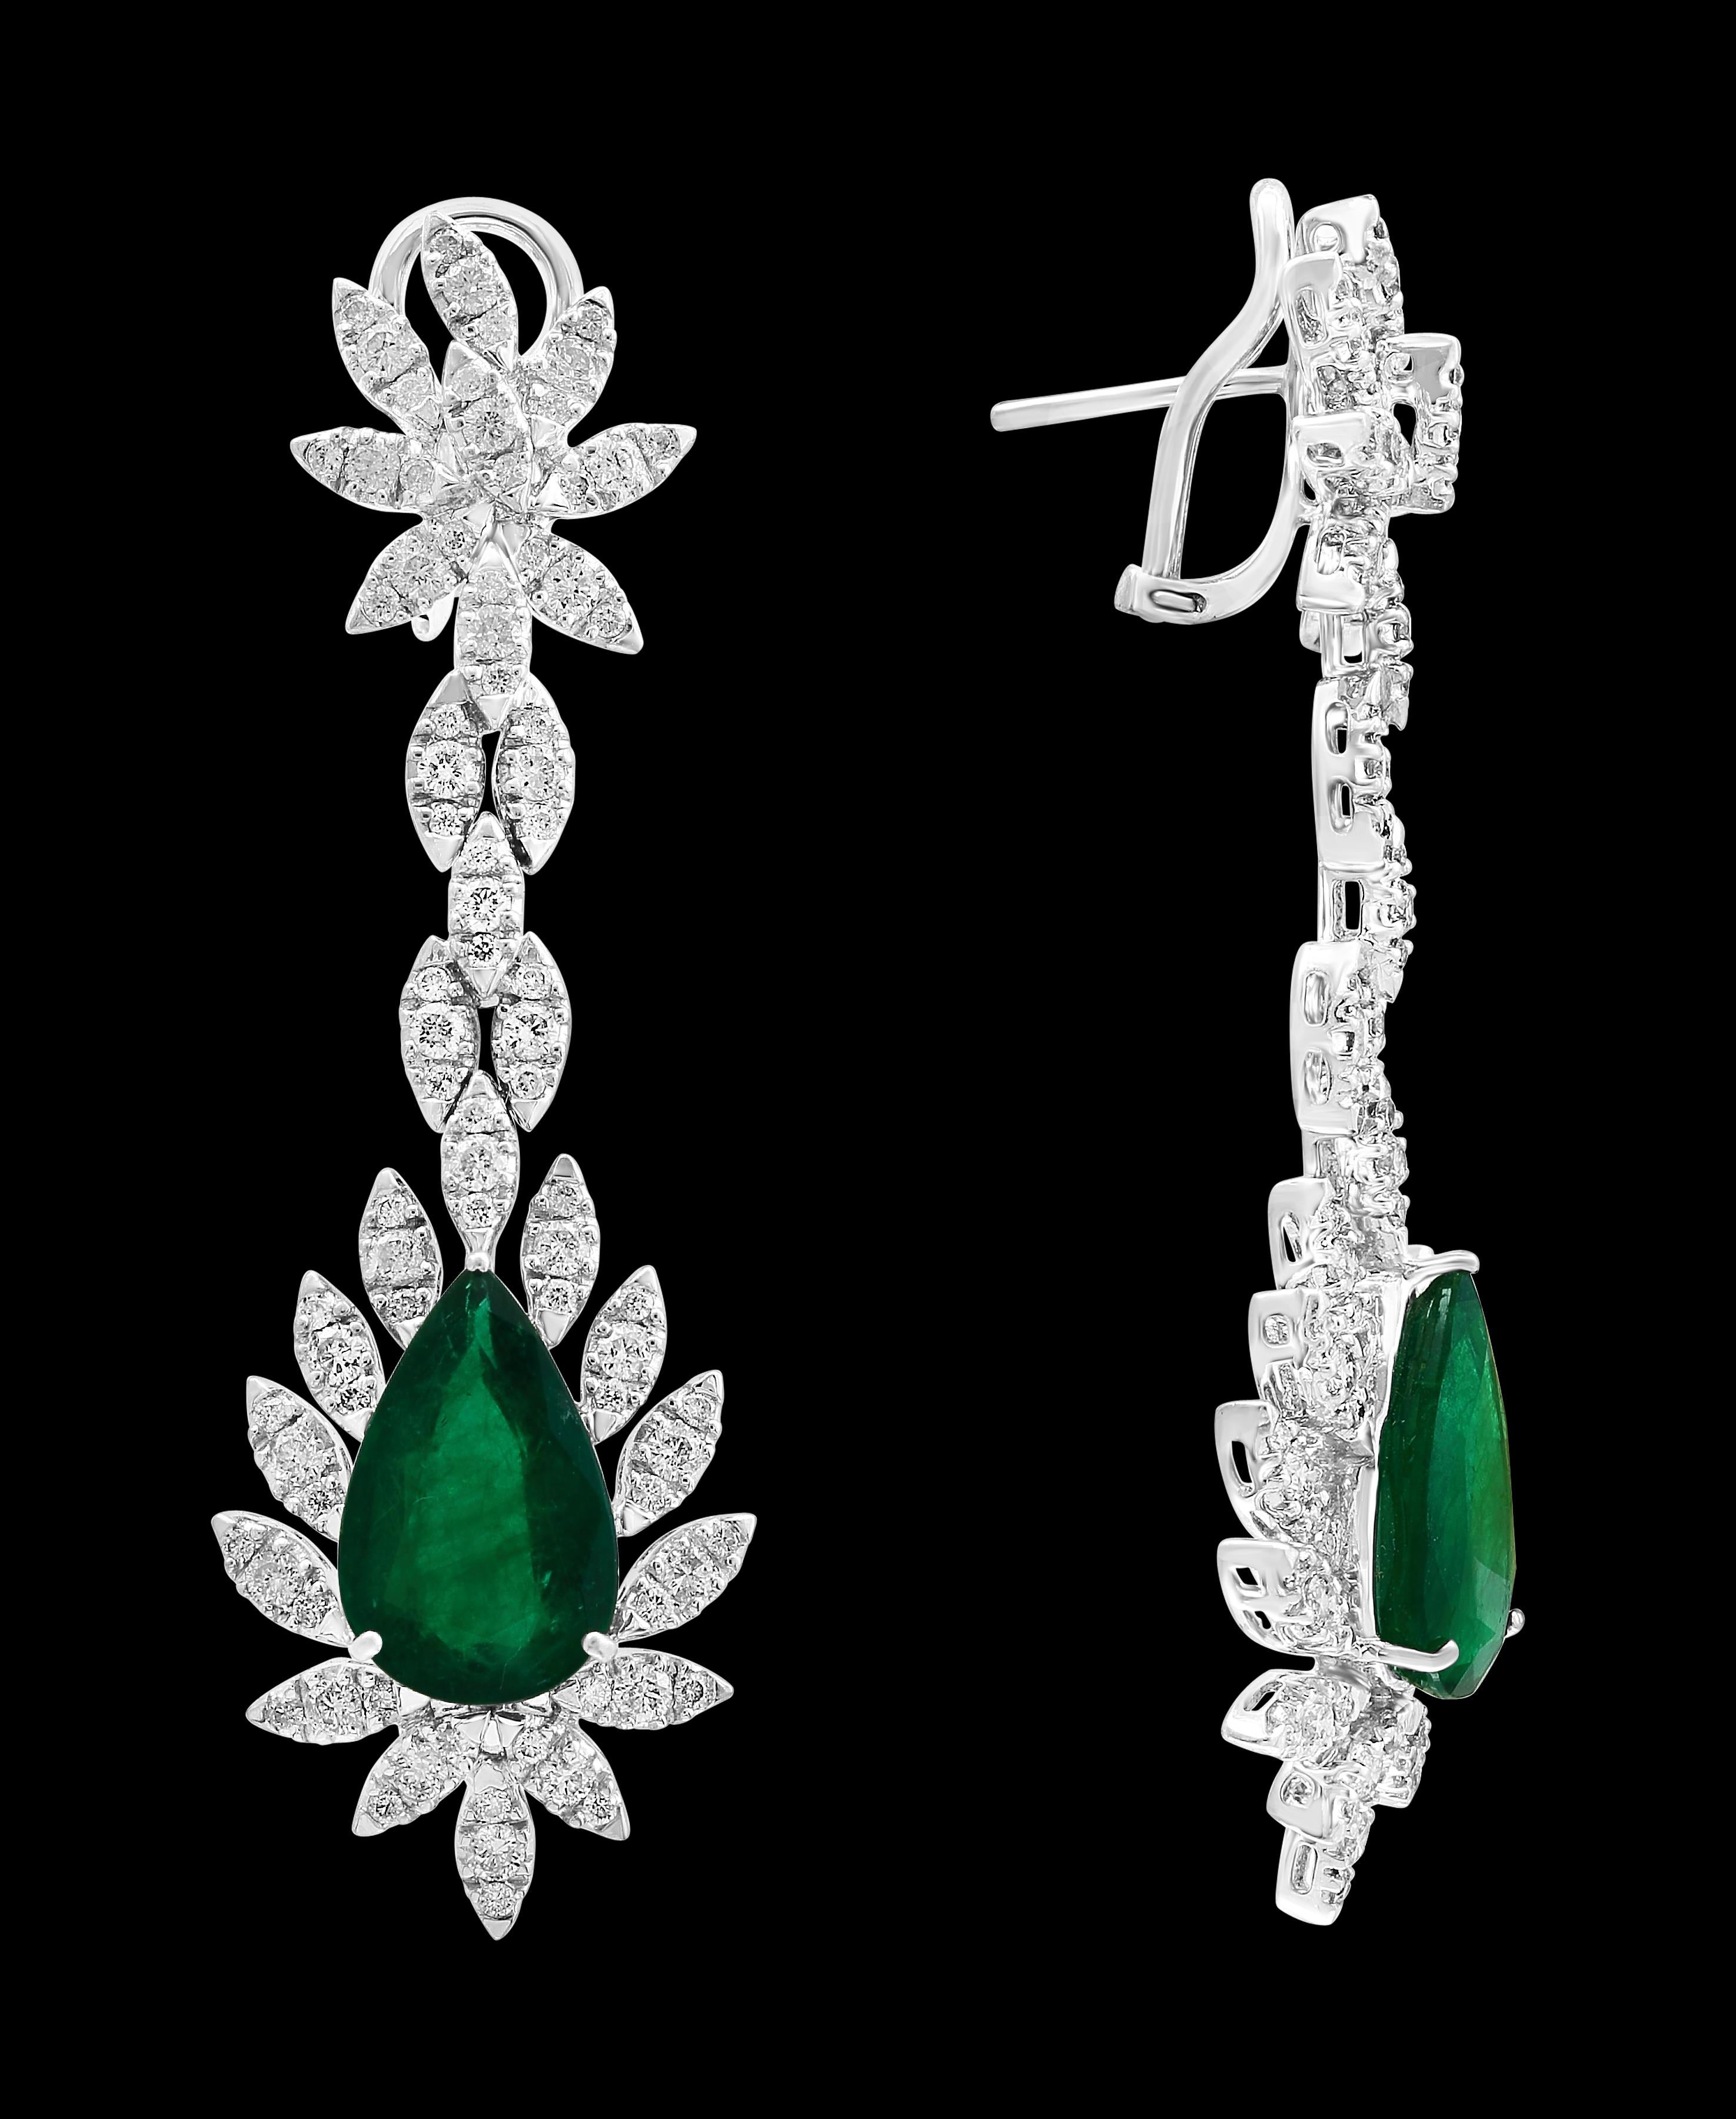 15 Carat Pear Shape Emerald Diamond Hanging/Drop Earrings 18 Karat White Gold In Excellent Condition For Sale In New York, NY